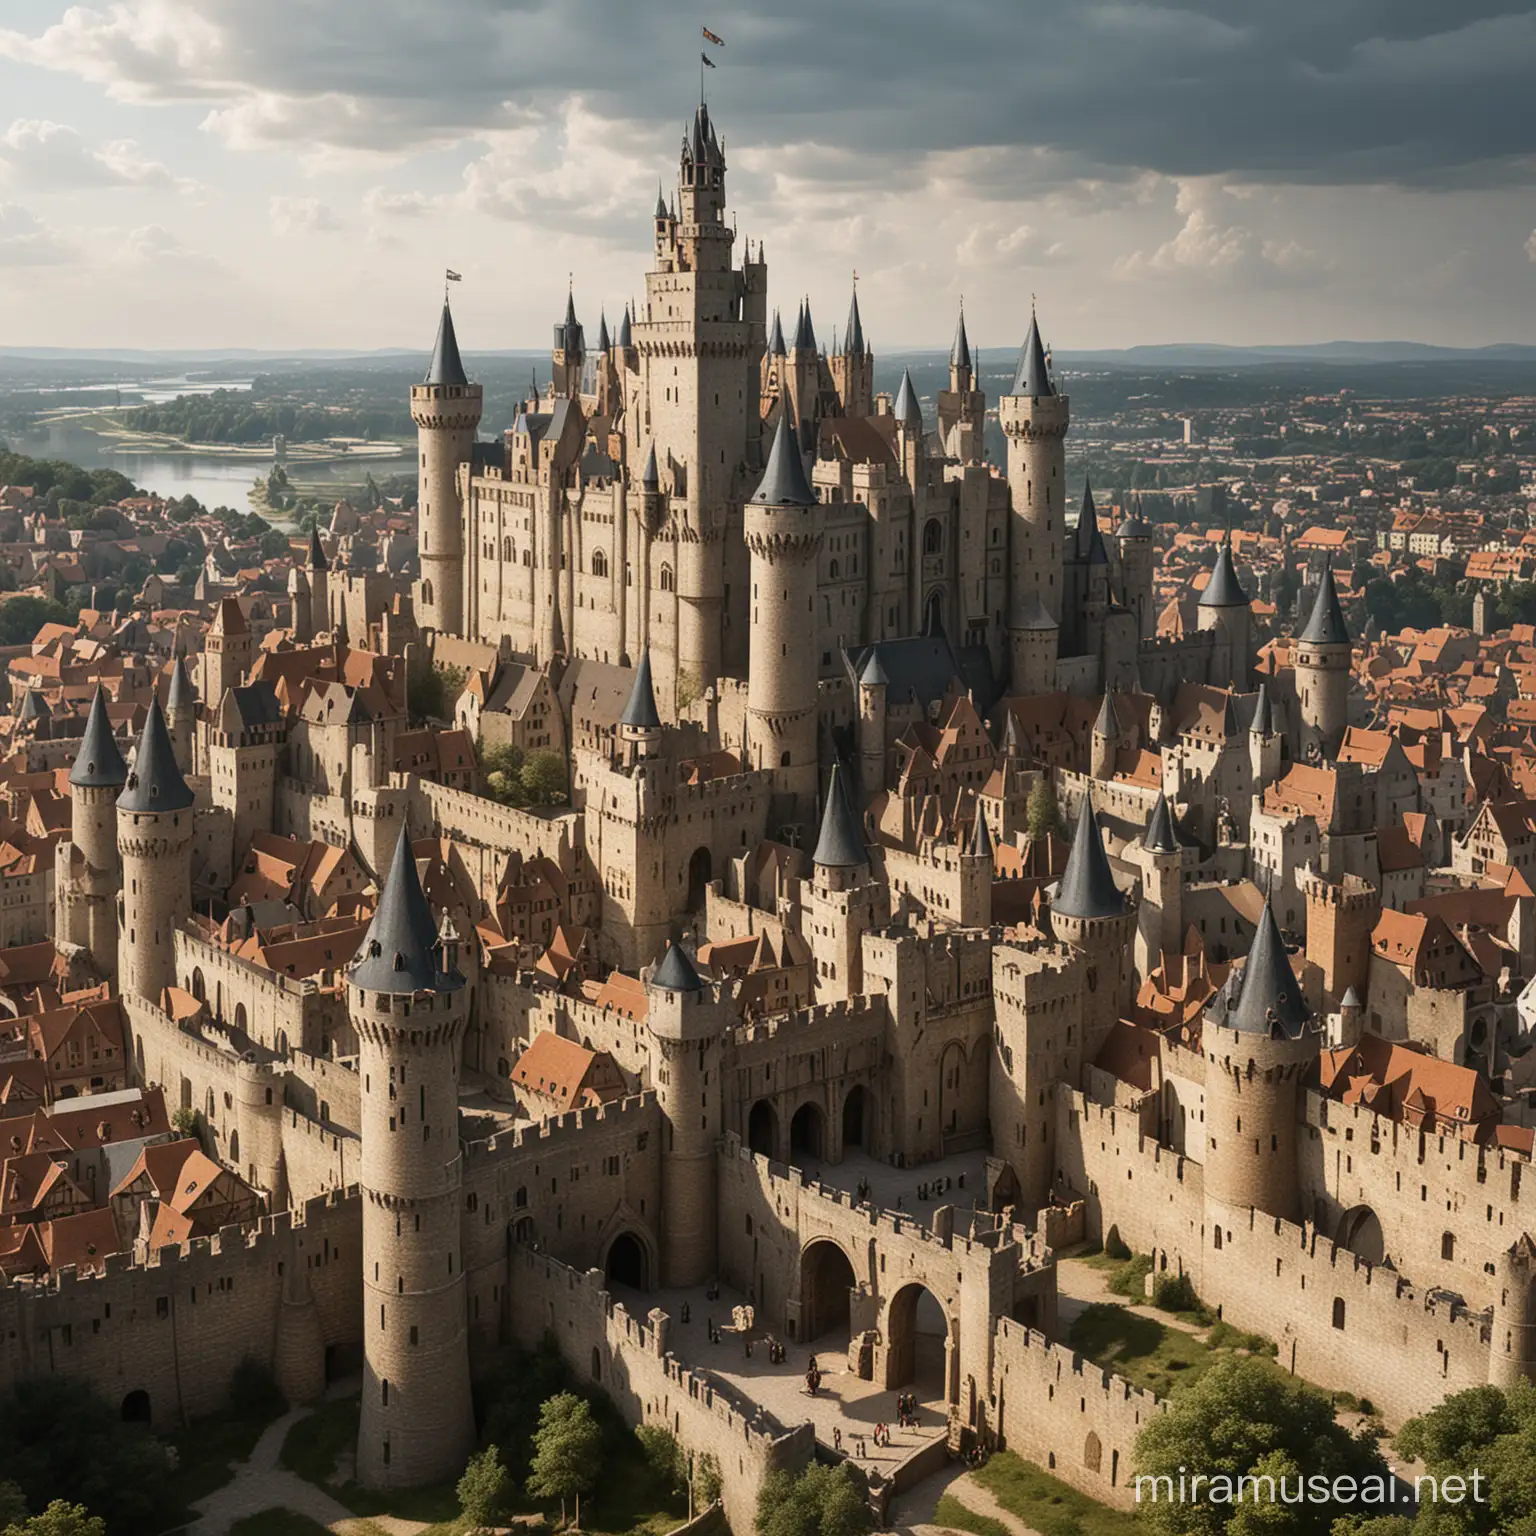 Inside a large medieval city there is a tall castle 